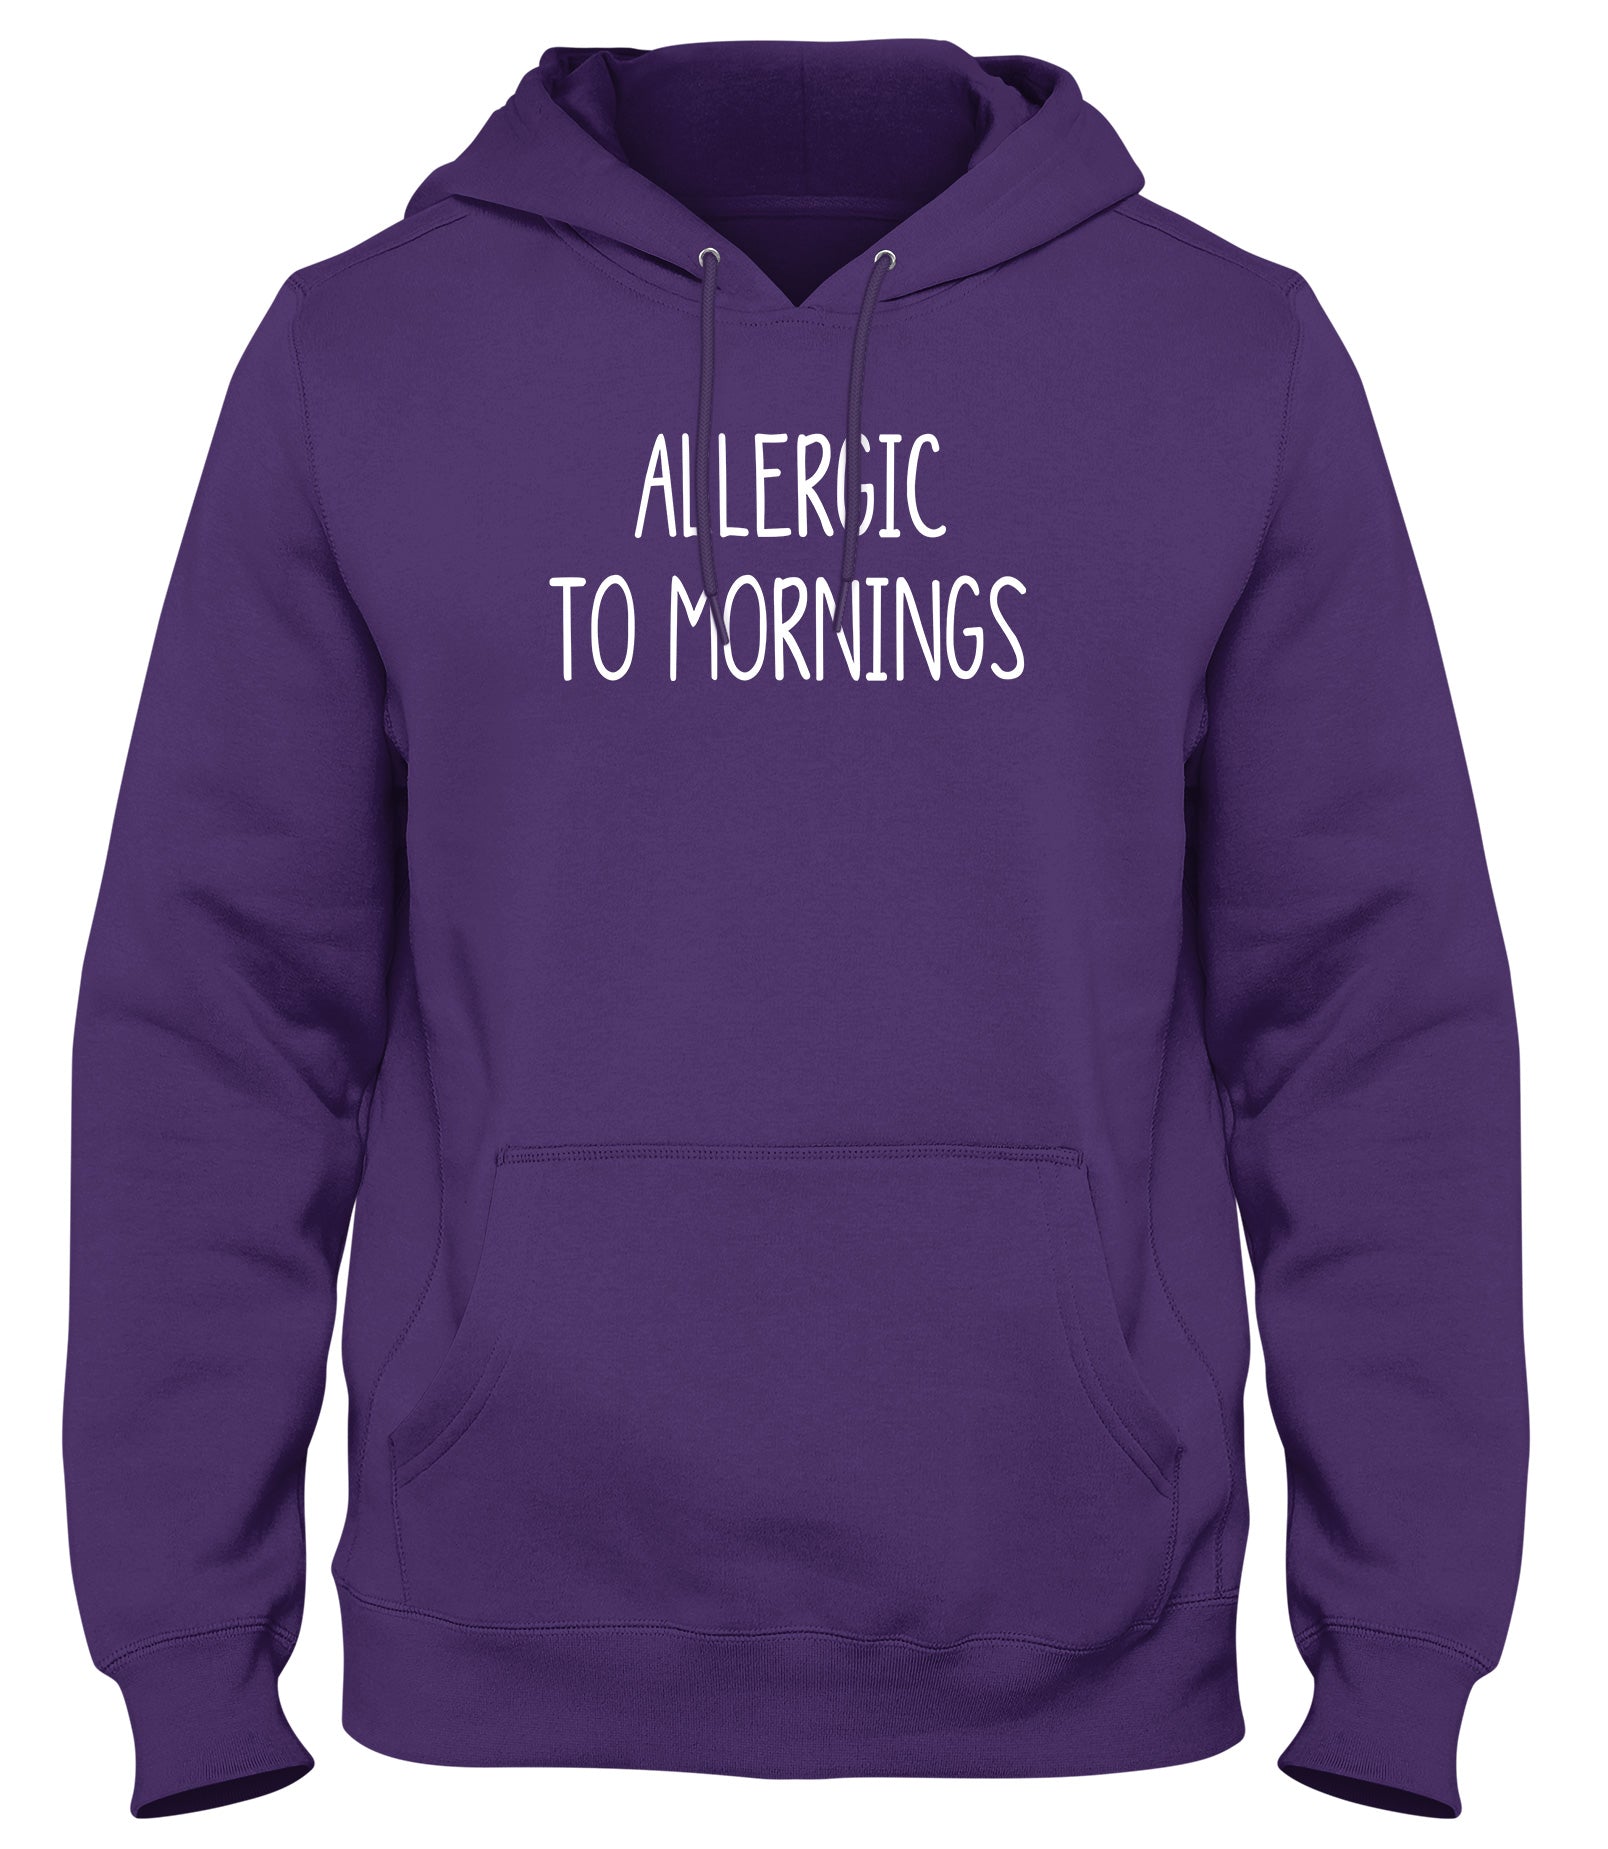 ALLERGIC TO MORNINGS MENS WOMENS UNISEX FUNNY HOODIE